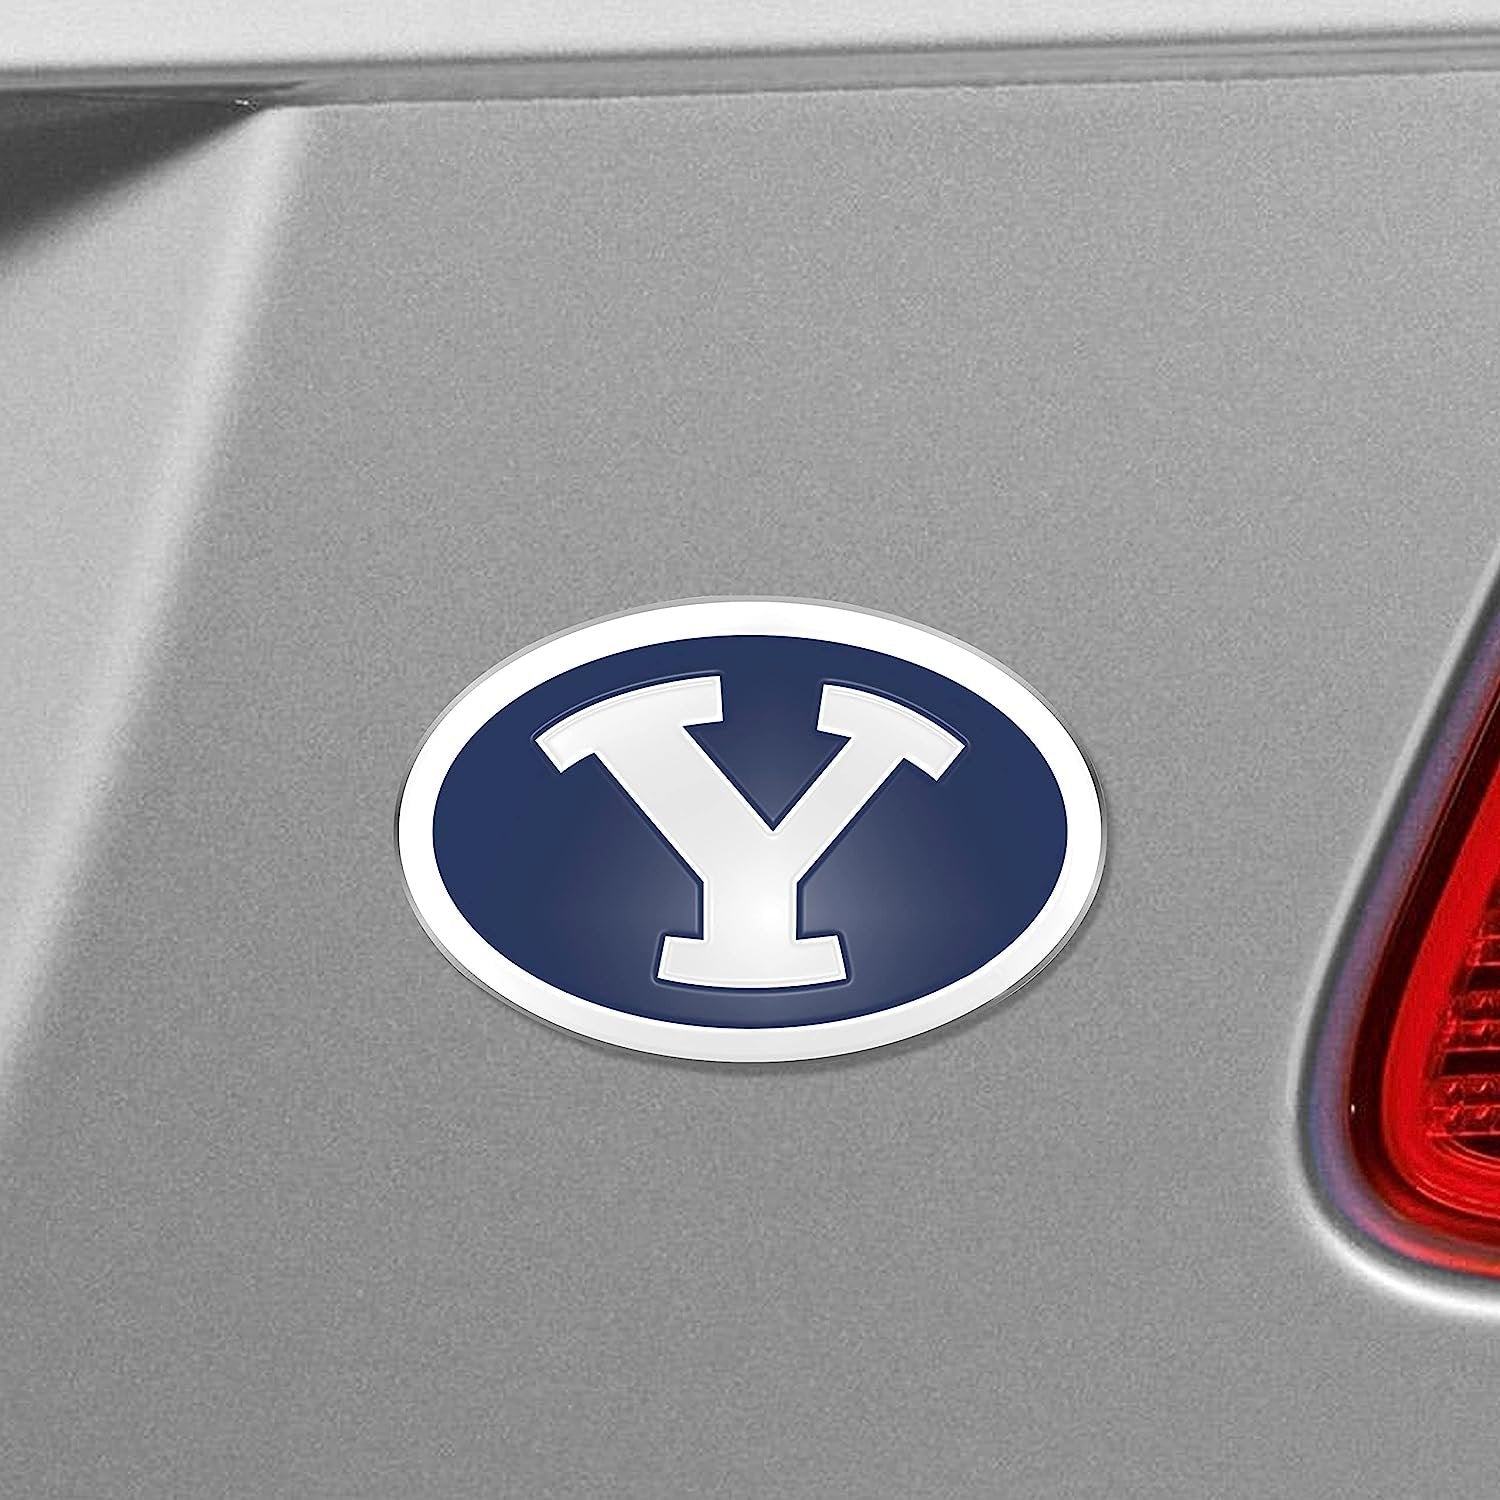 Brigham Young University Cougars Byu Embossed Color Auto Emblem Aluminum Metal Raised Decal Sticker Full Adhesive Backing